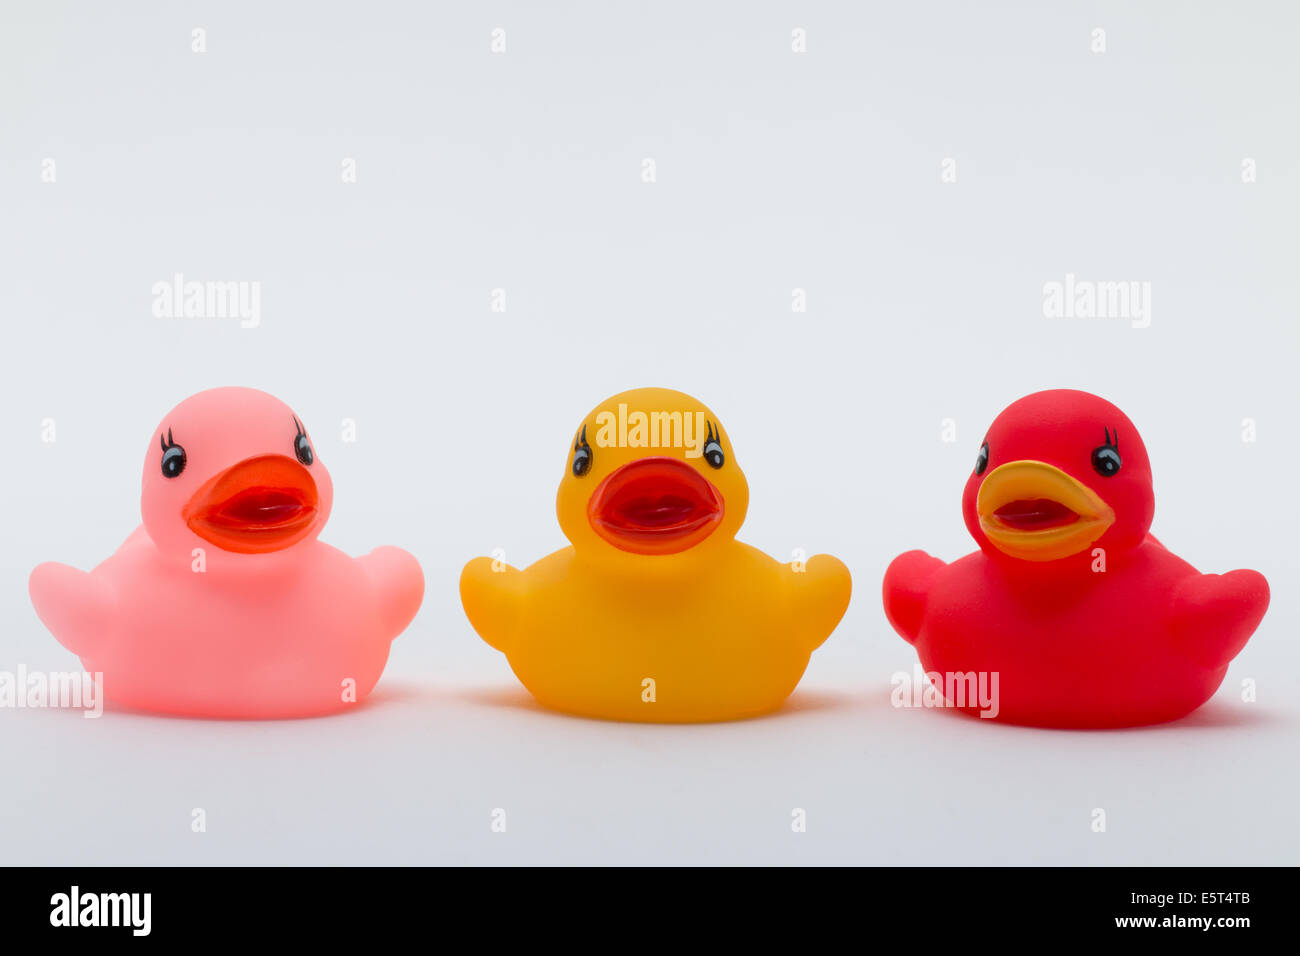 Three rubber ducks in different colors facing the viewer Stock Photo